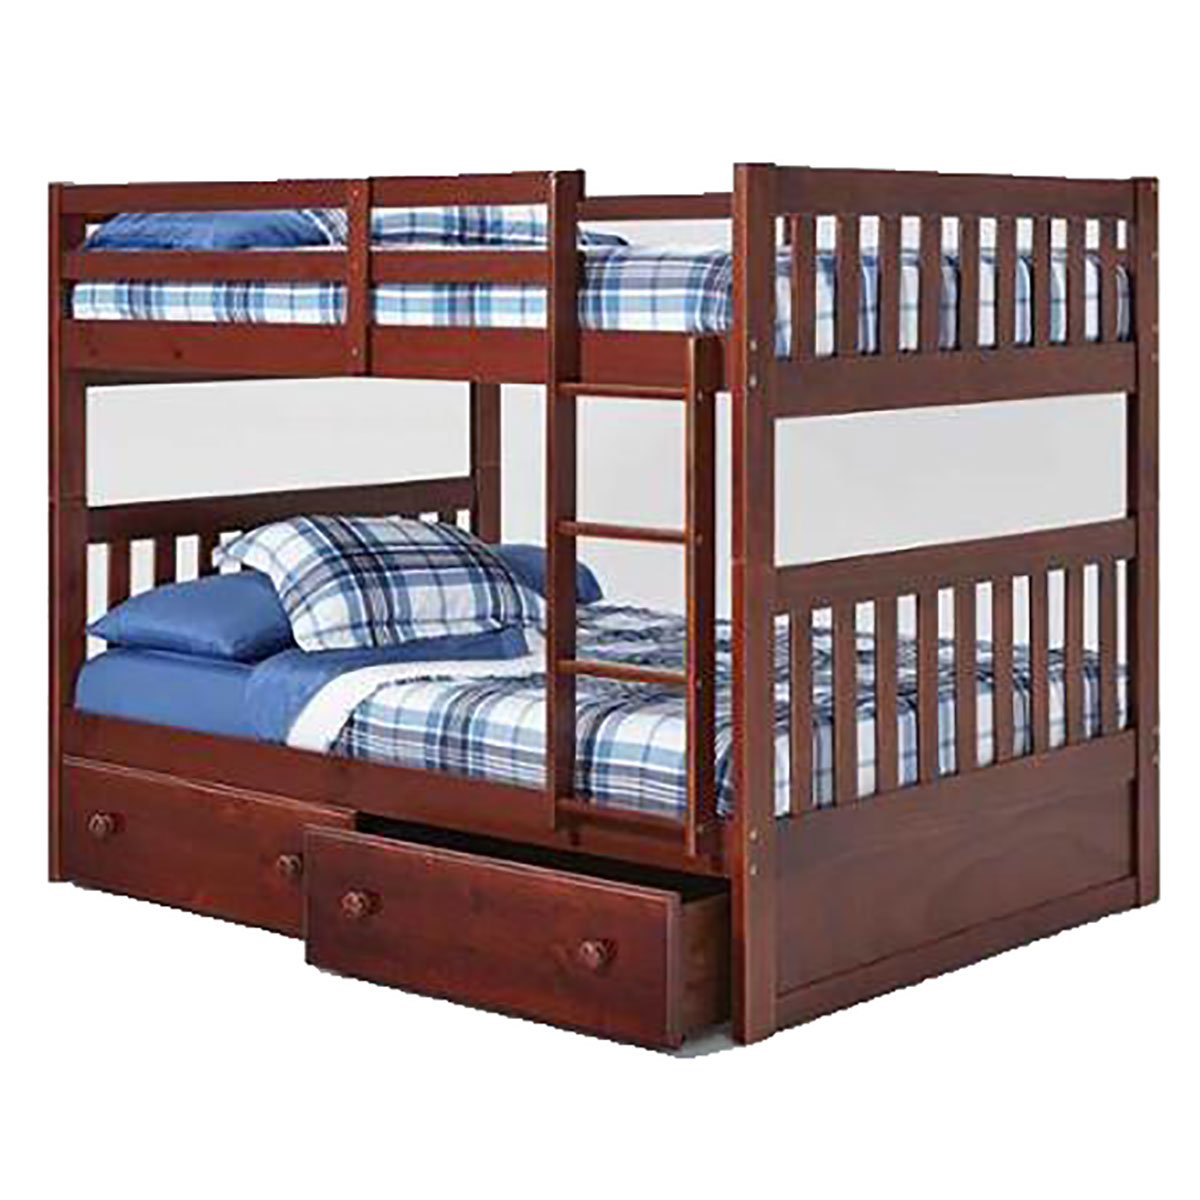 Chelsea Home Full Over Full Mission Bunk Bed with Under Bed Storage - Chocolate